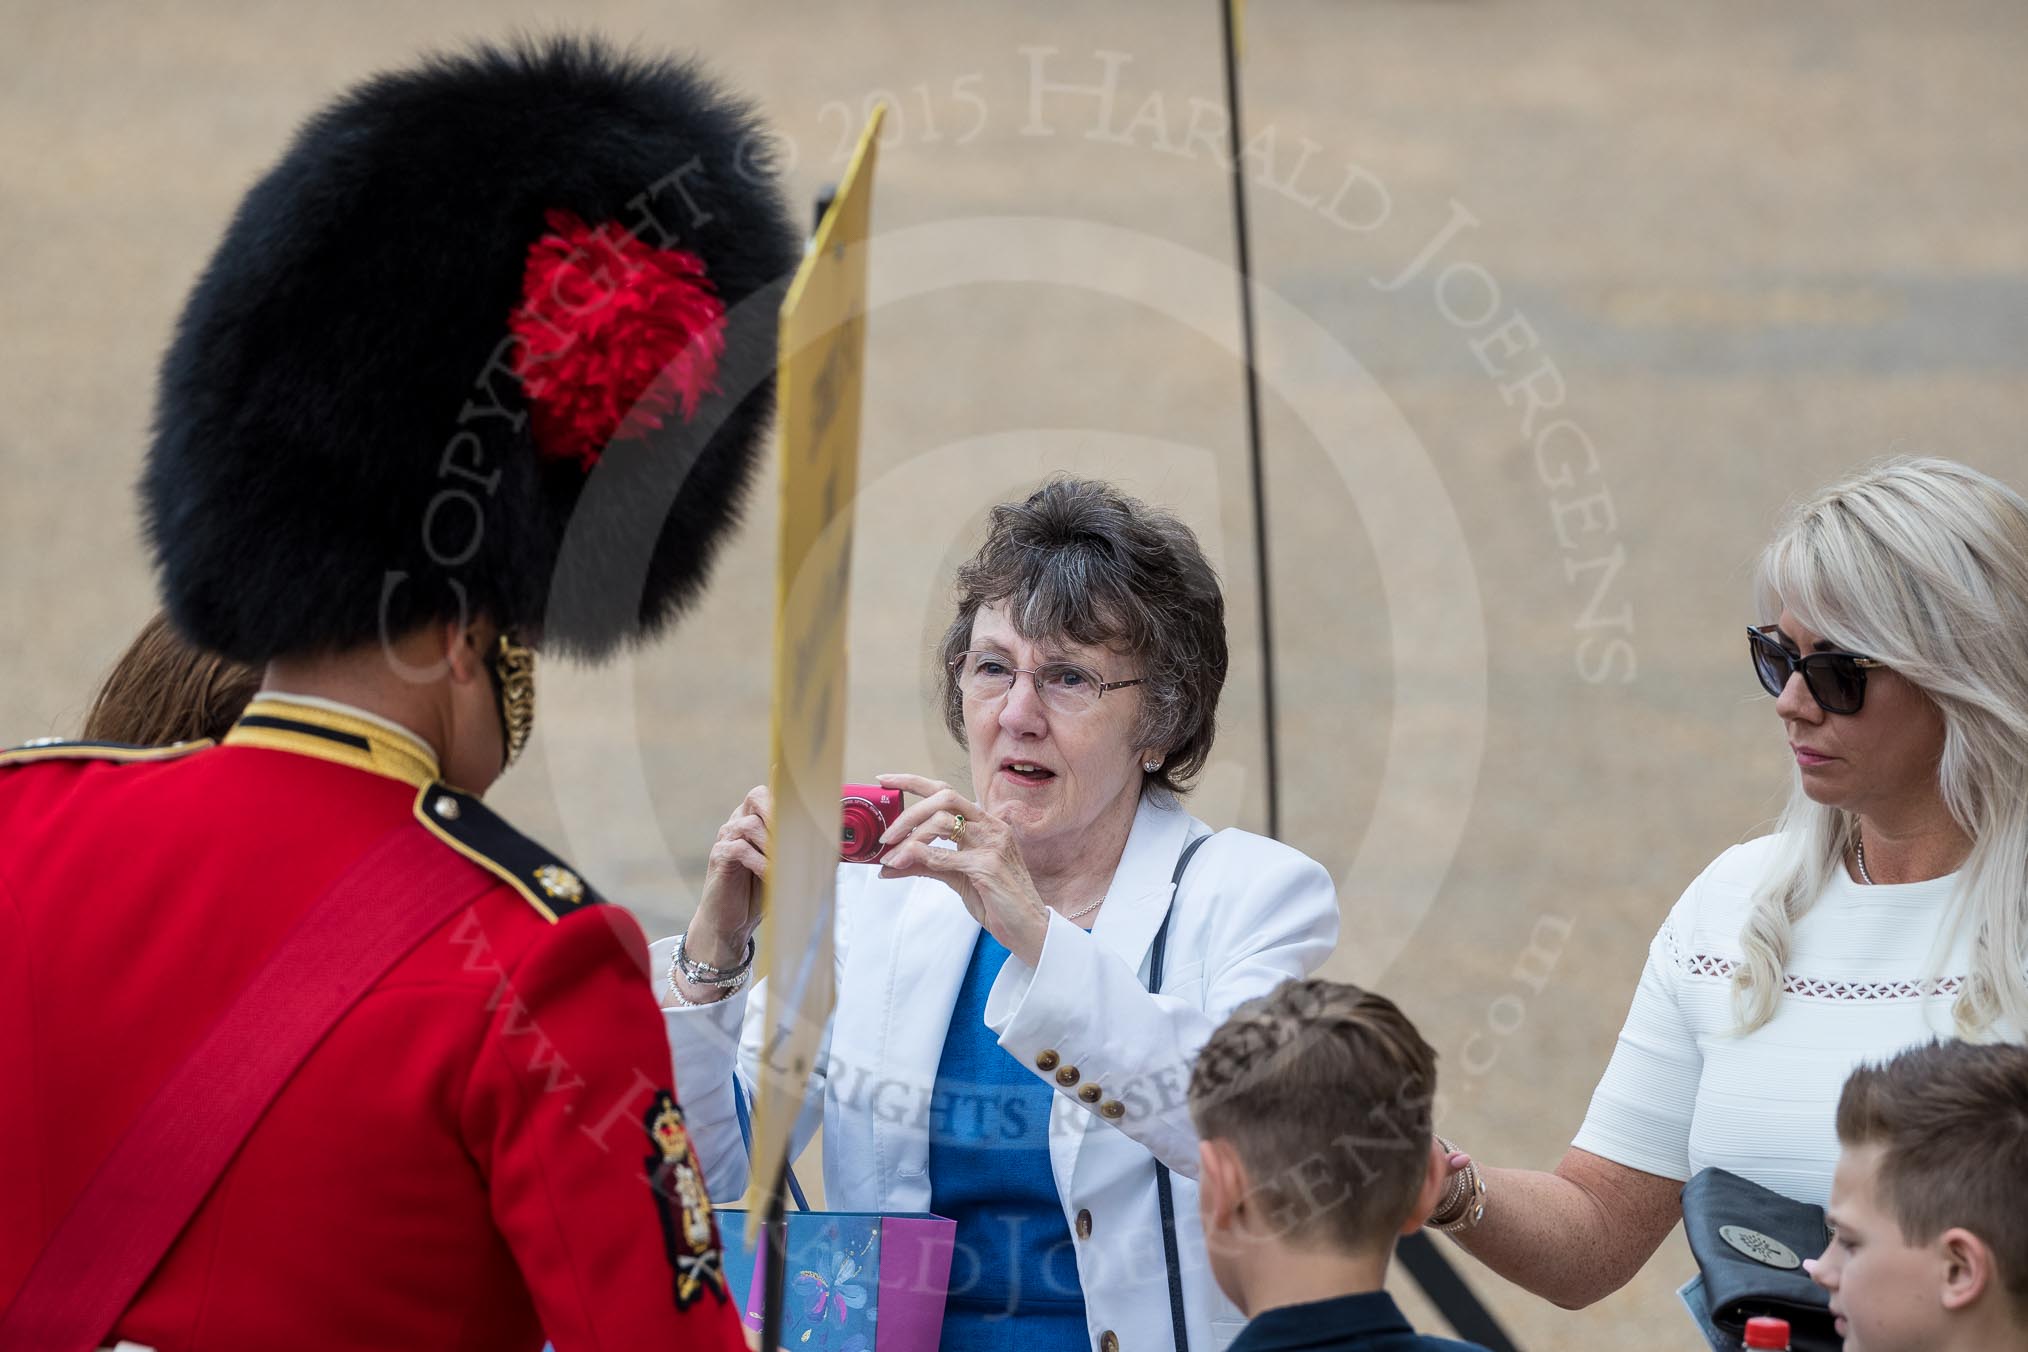 Trooping the Colour 2016.
Horse Guards Parade, Westminster,
London SW1A,
London,
United Kingdom,
on 11 June 2016 at 09:26, image #16